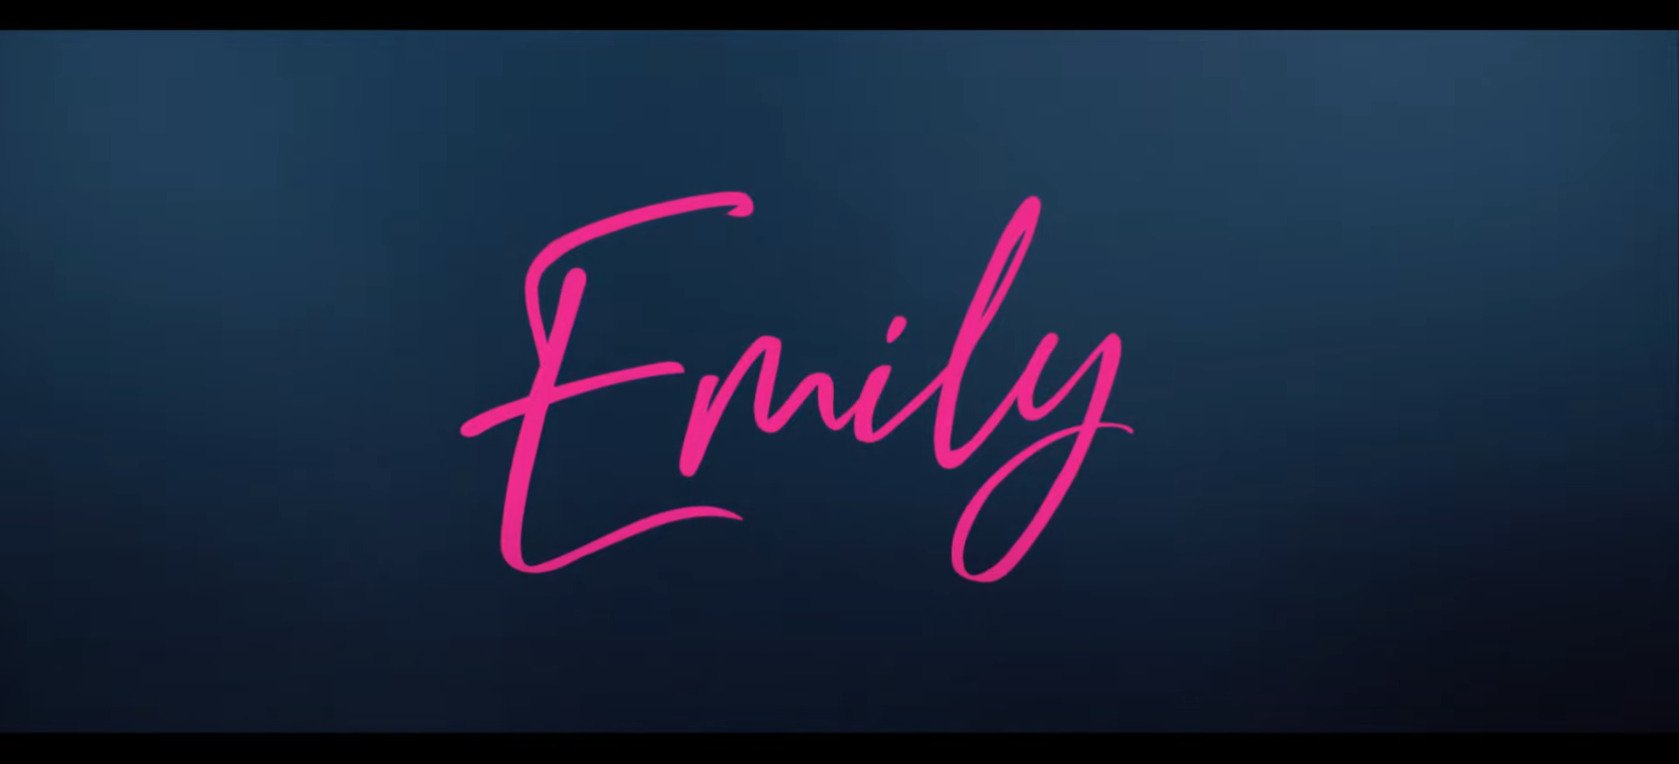 Image name emily title the 6 image from the post Movie "Emily" set for 14 October 2022 Release in Yorkshire.com.